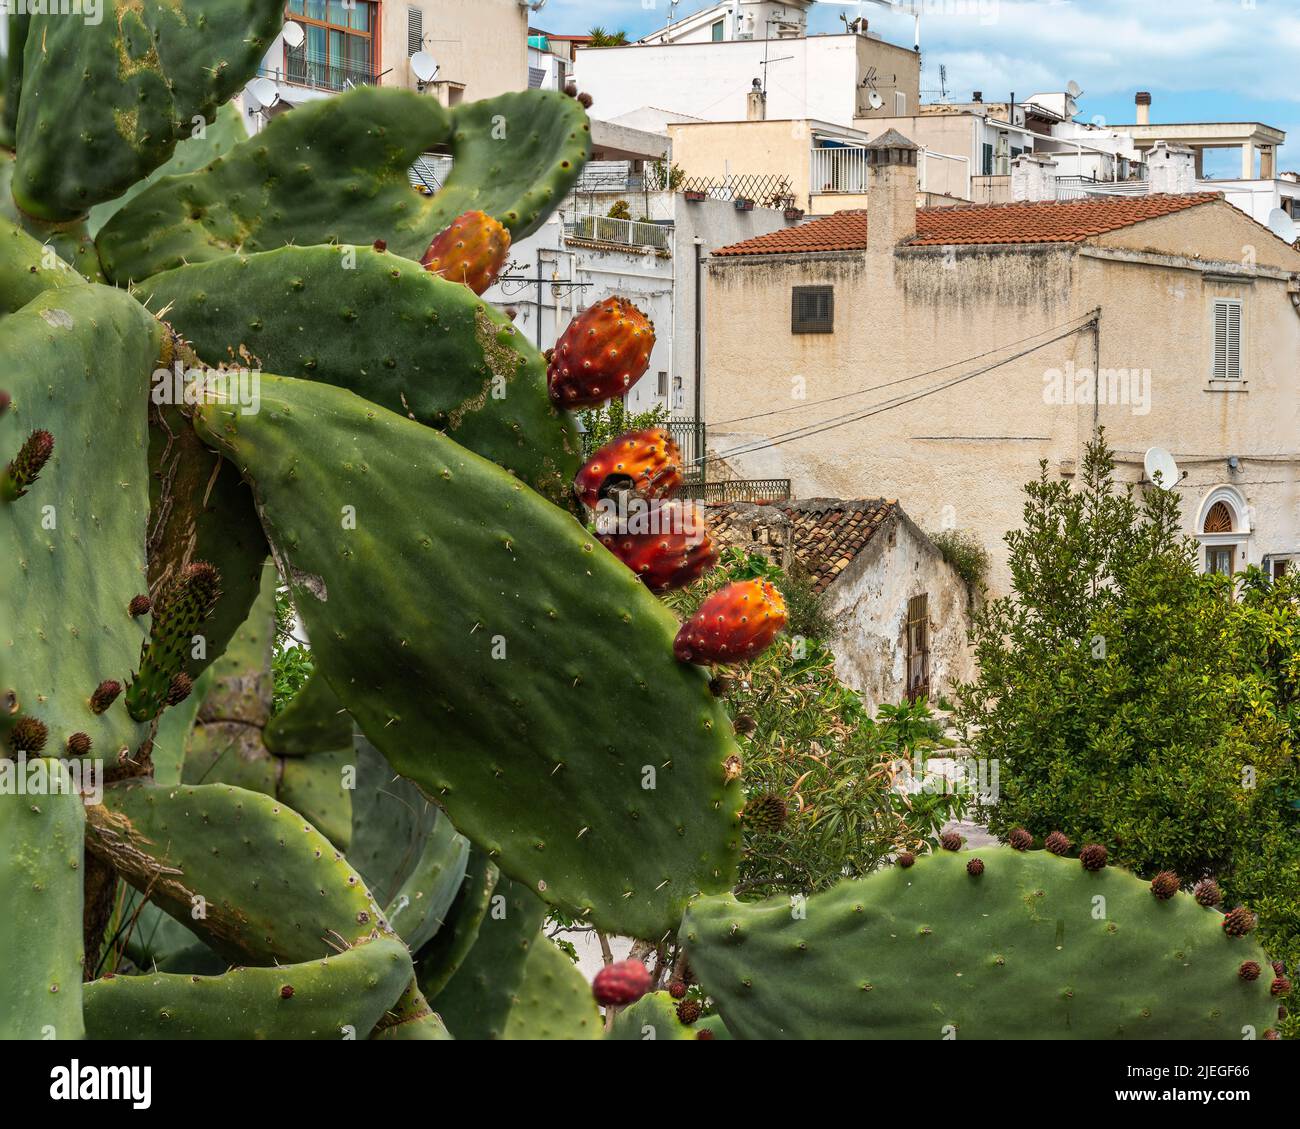 Prickly pear fruits in front of the seaside town of Peschici. Peschici, Foggia province, Puglia, Italy, Europe Stock Photo